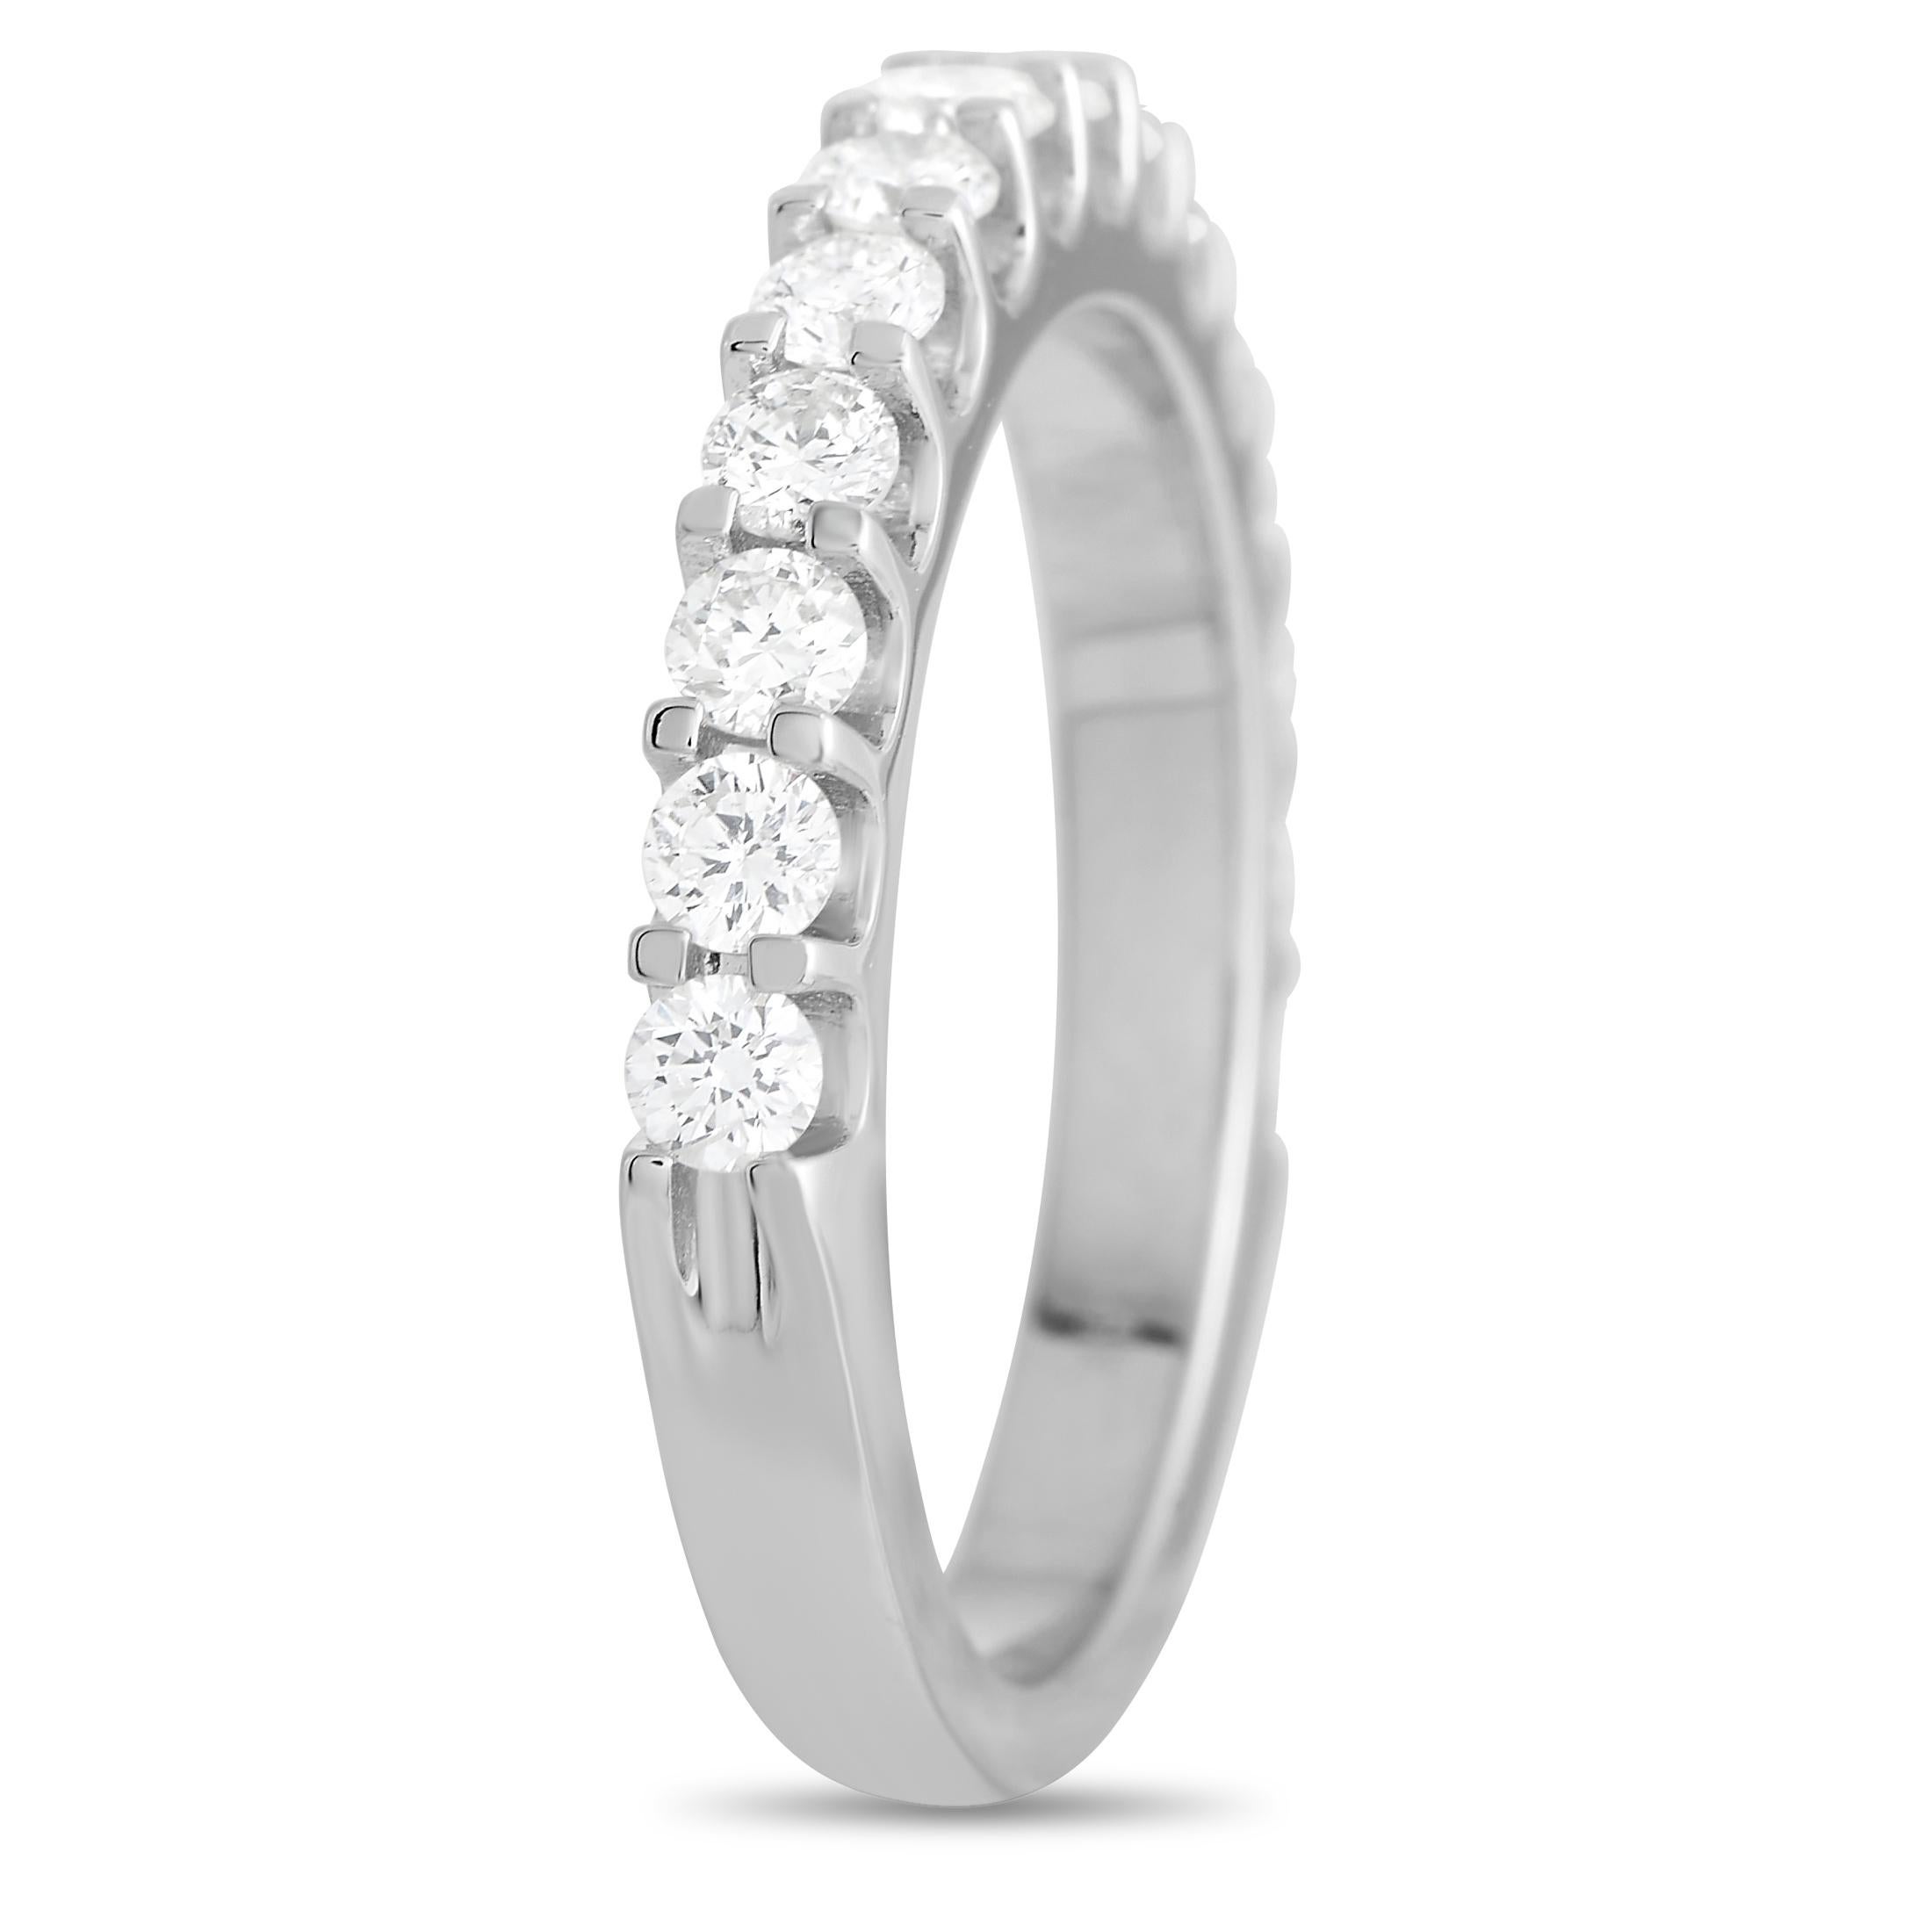 This 3mm band ring is both simple and statement-making. Round-cut diamonds with a total carat weight of 0.95 carats sparkle from their place within a 14K White Gold setting. It’s a minimalist piece with plenty of personality. 
 
 This jewelry piece